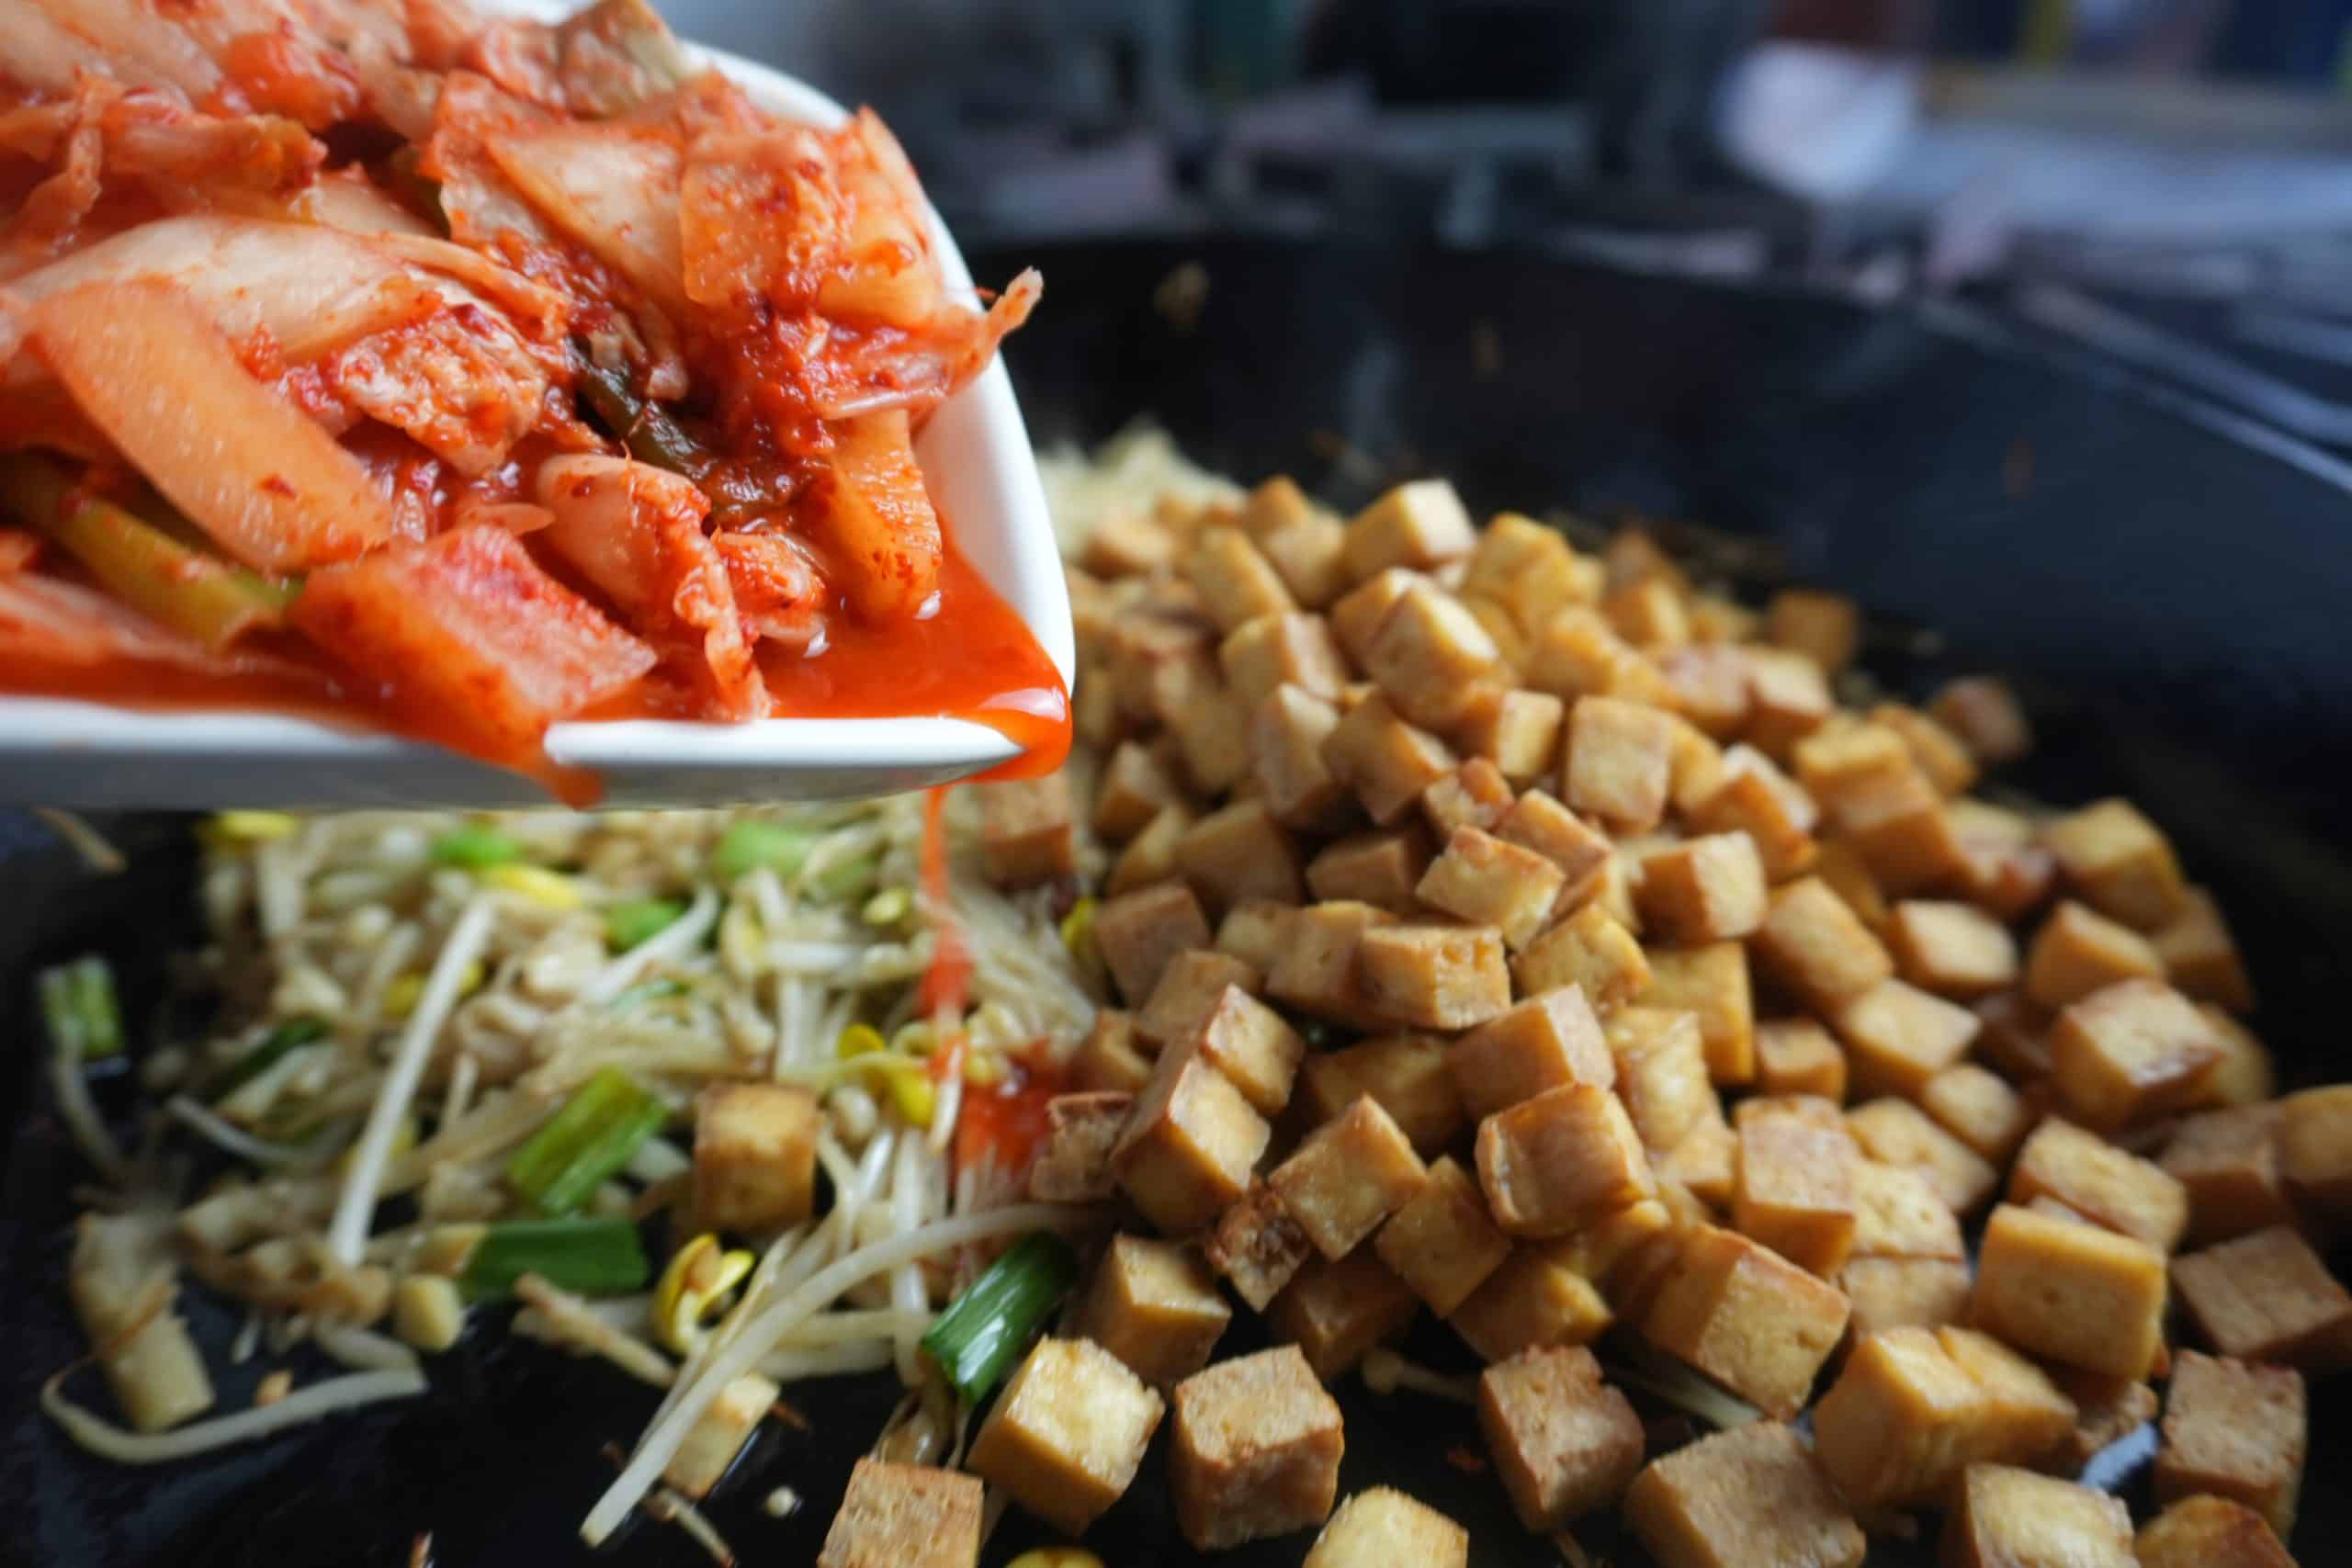 Kimchi getting added to the pan along with cubes of roasted tofu.